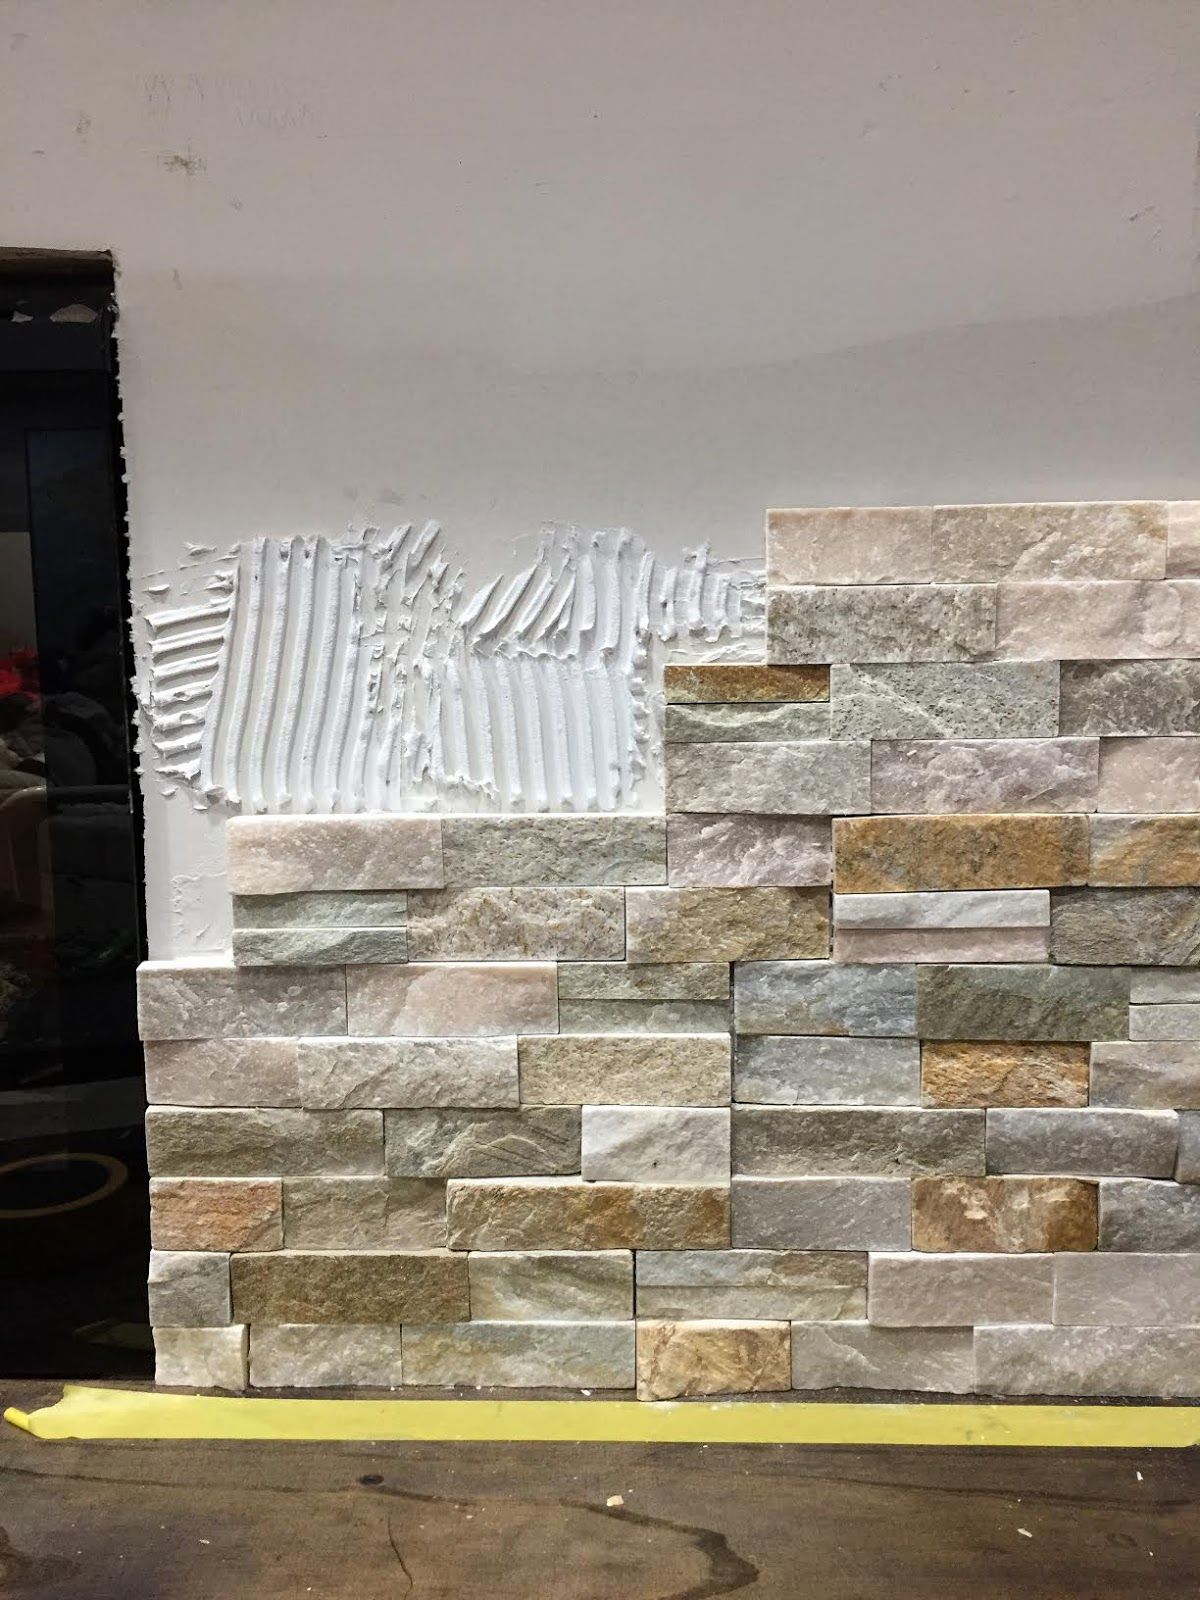 Cover Brick Fireplace with Stone New How to Install Stacked Stone Tile On A Fireplace Wall